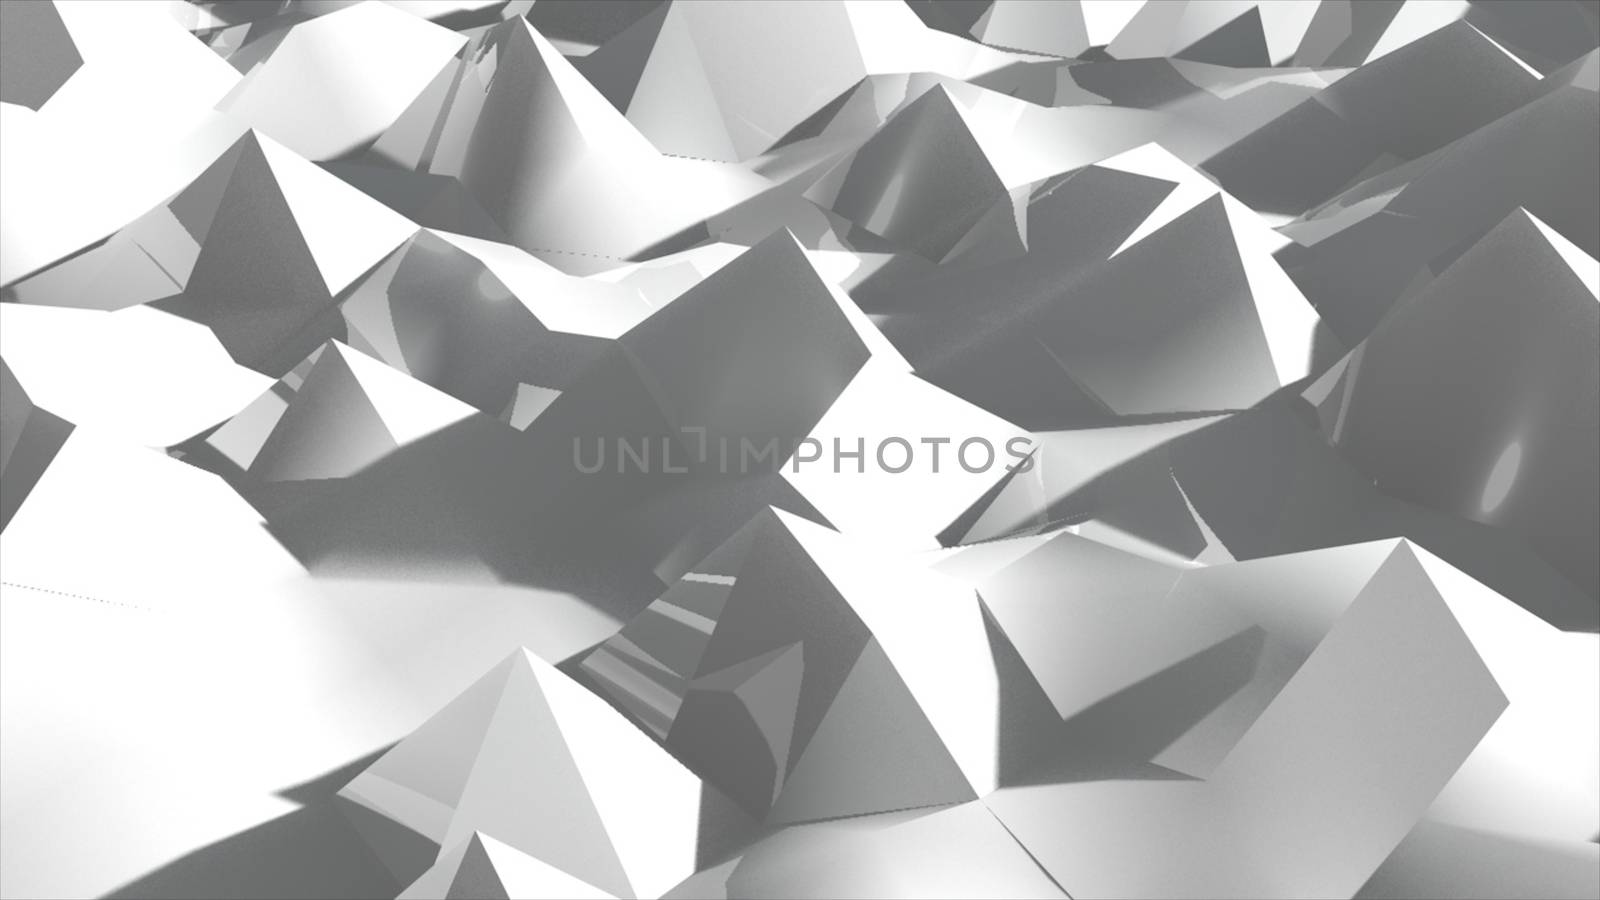 Low poly geometric abstract background in embossed triangular and polygon style. 3D rendering